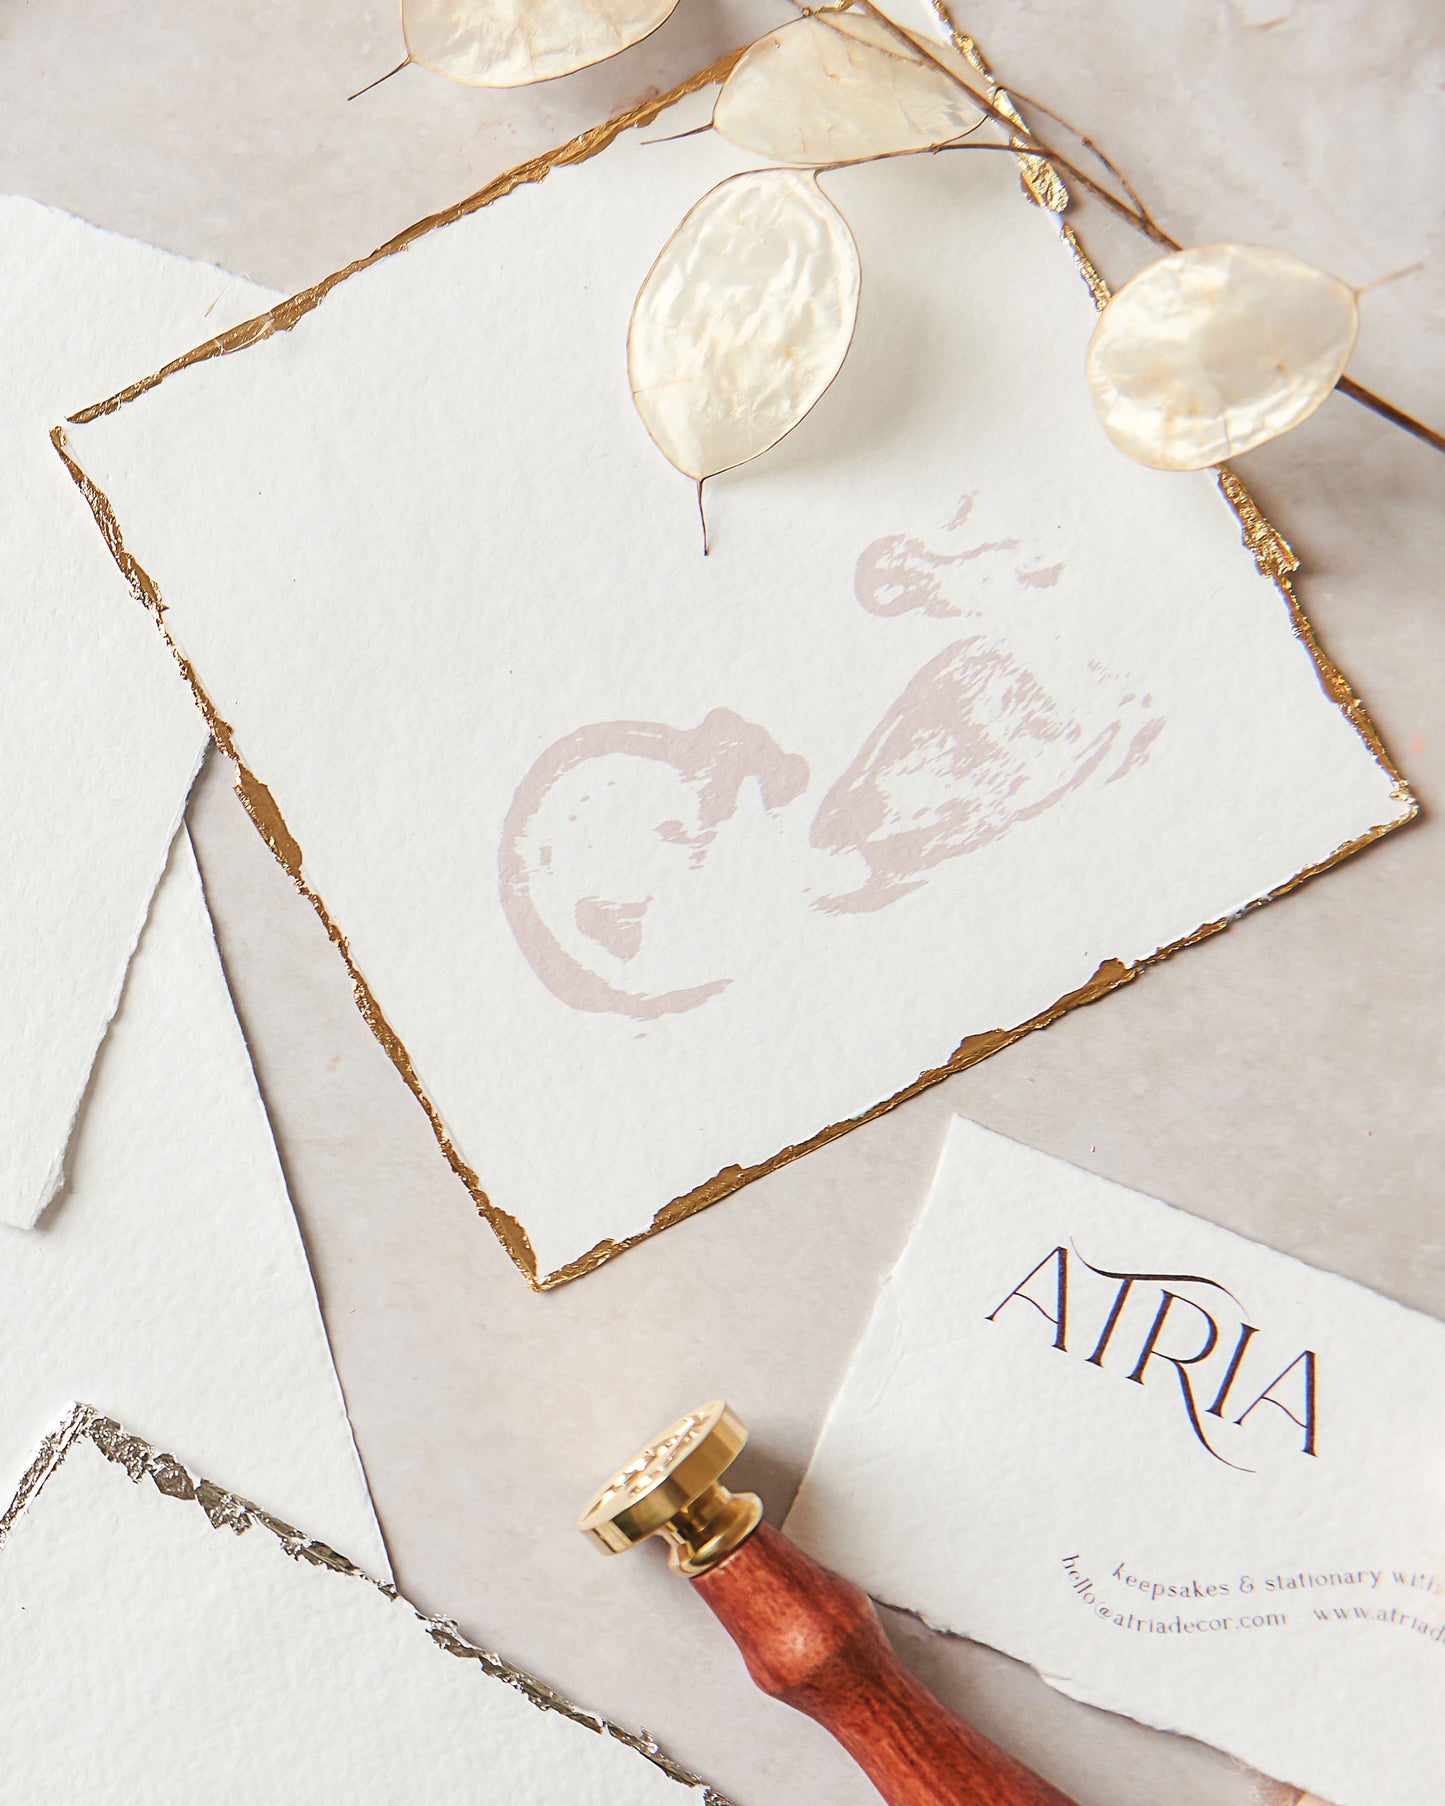 A close up photograph of a baby scan keepsake on white handmade paper, with gold leaf gilt deckle edges and the silhouette of the baby printed in a light dusky pink ink. Other handmade papers, a brass wax seal stamp and a dried stem of lunaria honesty surround the sentimental keepsake.